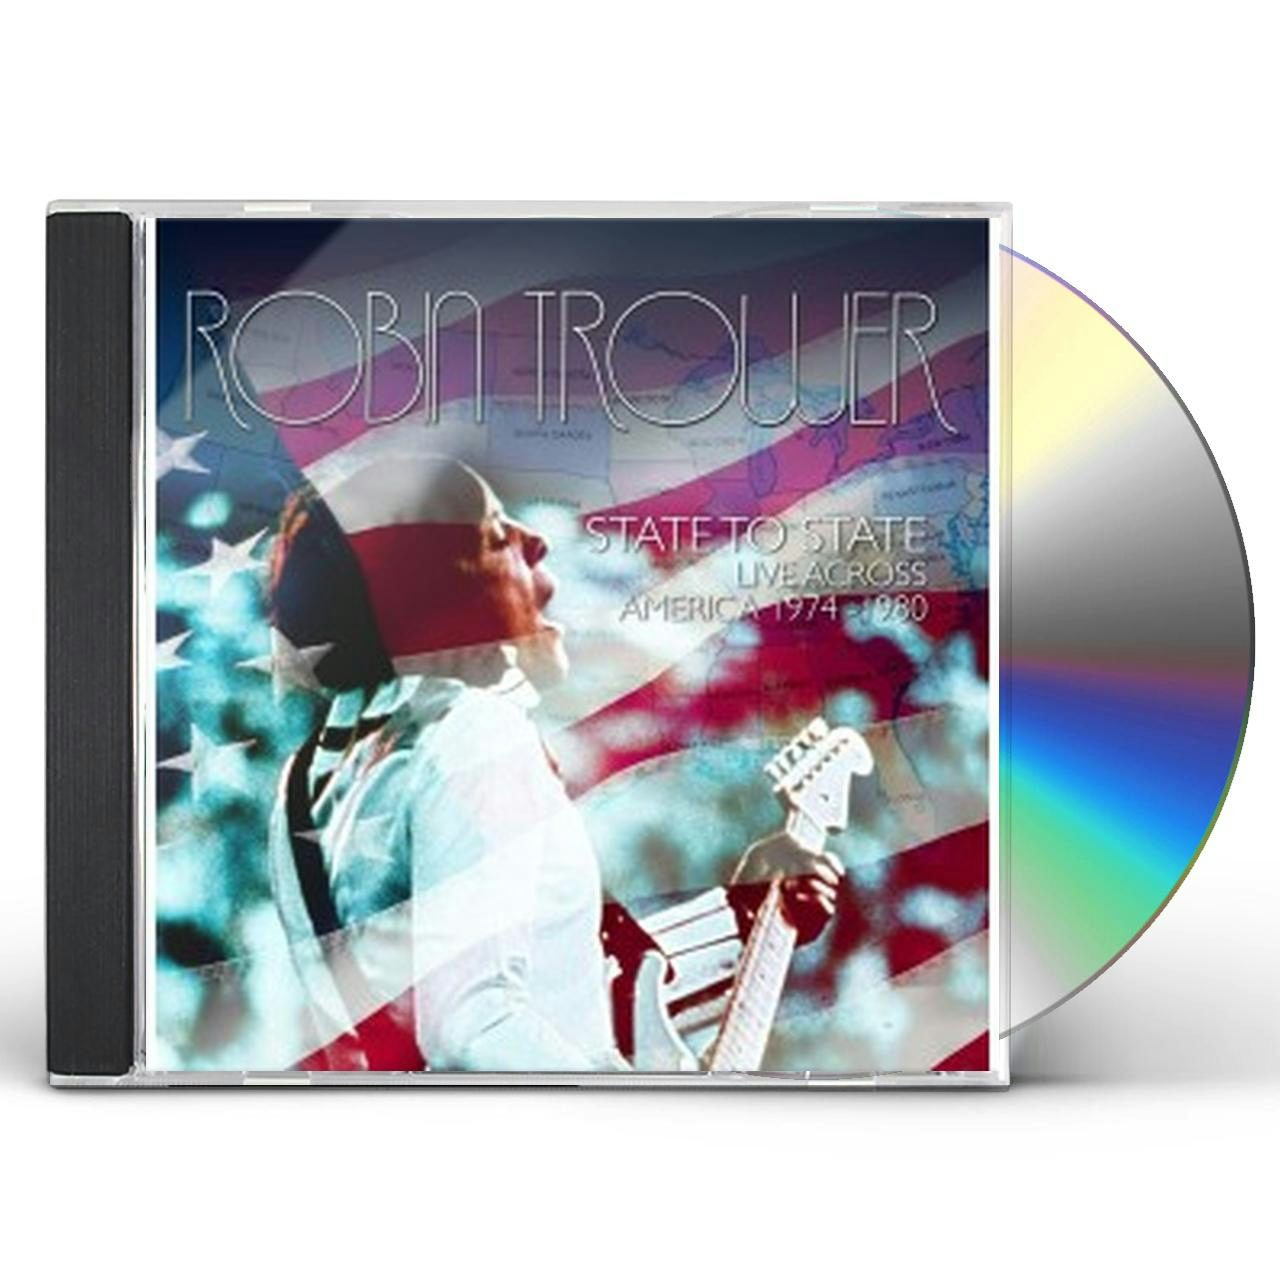 download free robin trower united state of mind